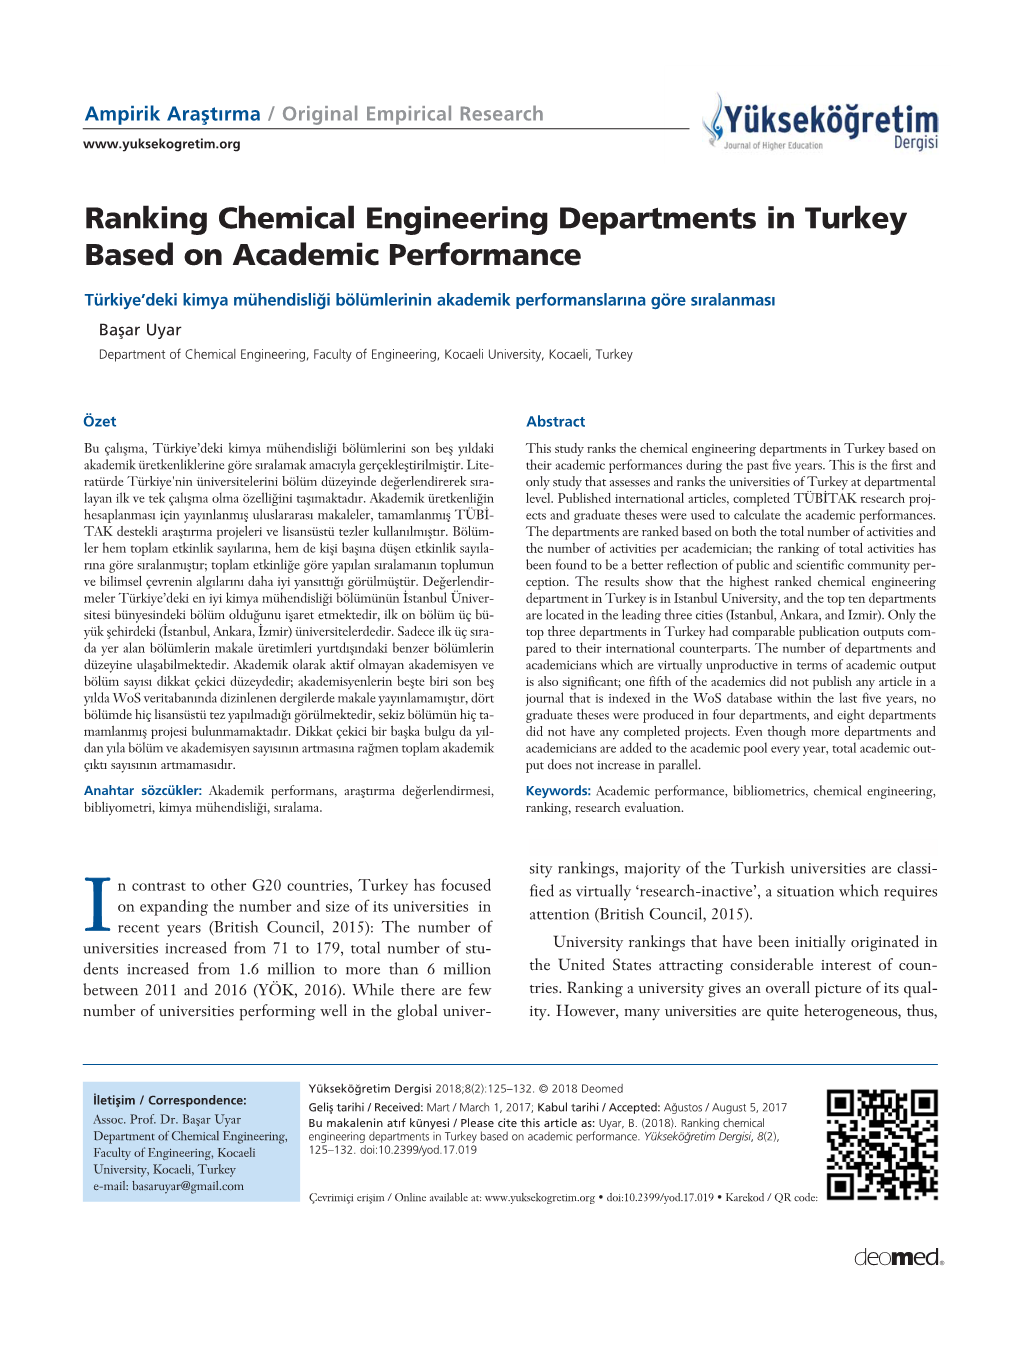 Ranking Chemical Engineering Departments in Turkey Based on Academic Performance